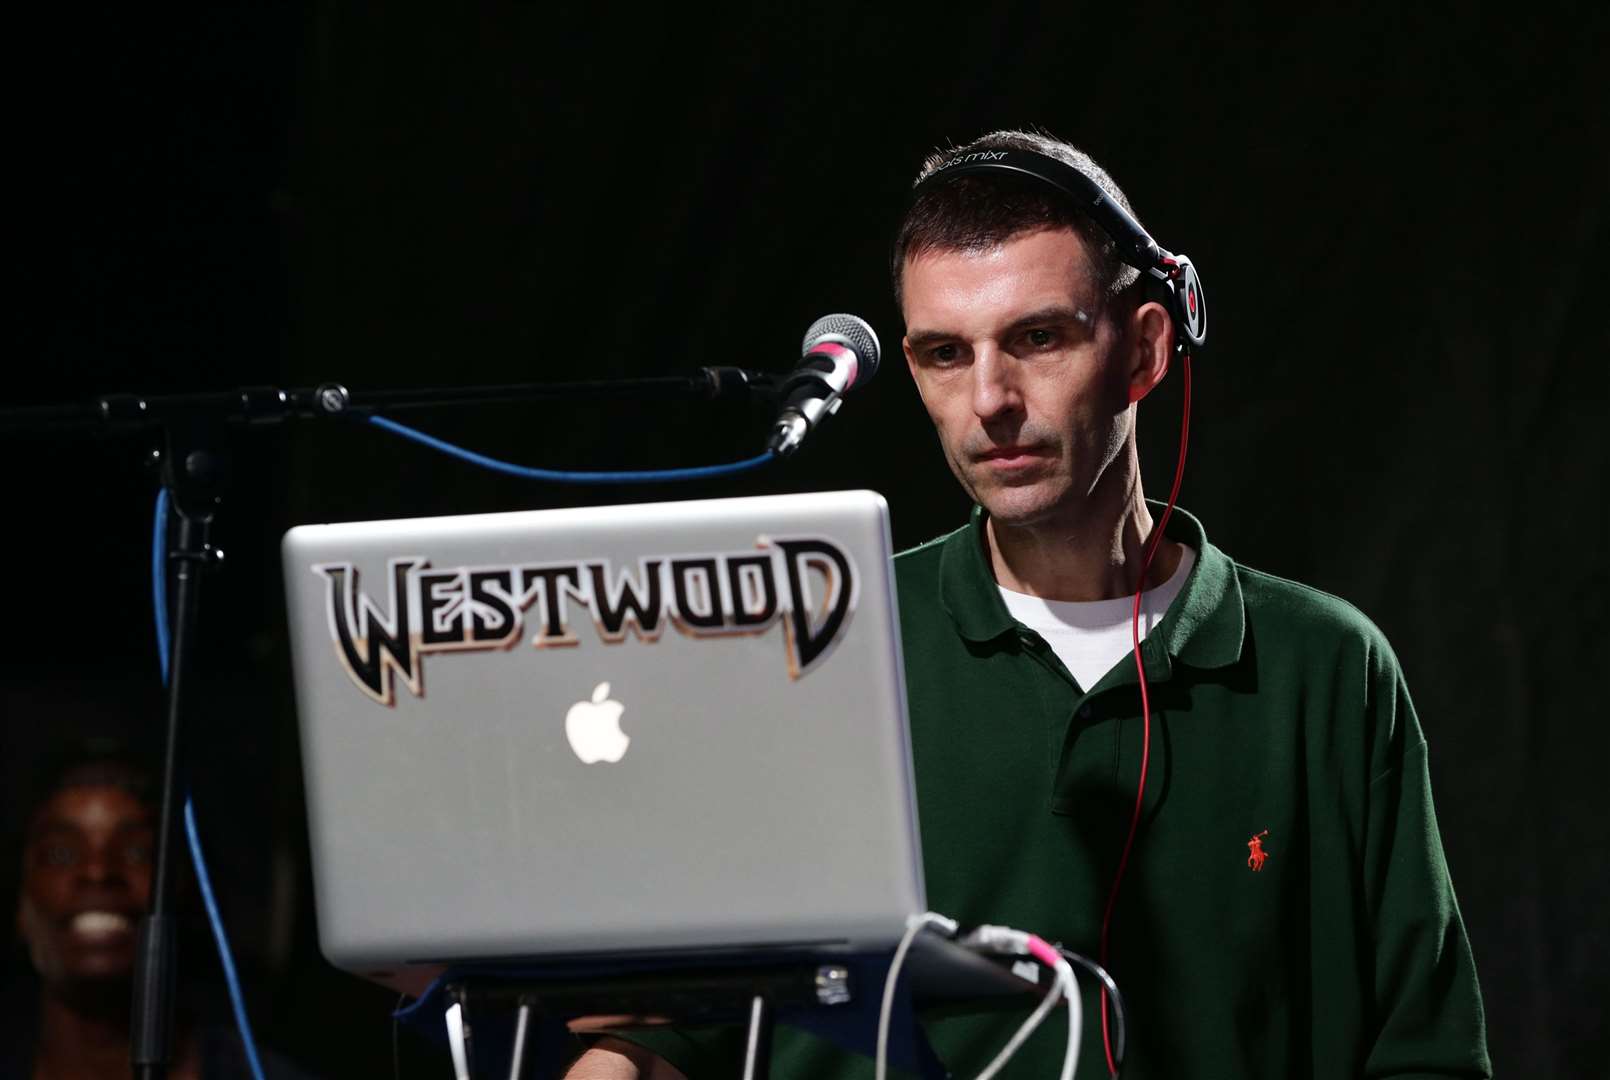 DJ Tim Westwood performing at the Wireless Festival in Finsbury Park (Yui Mok/PA)